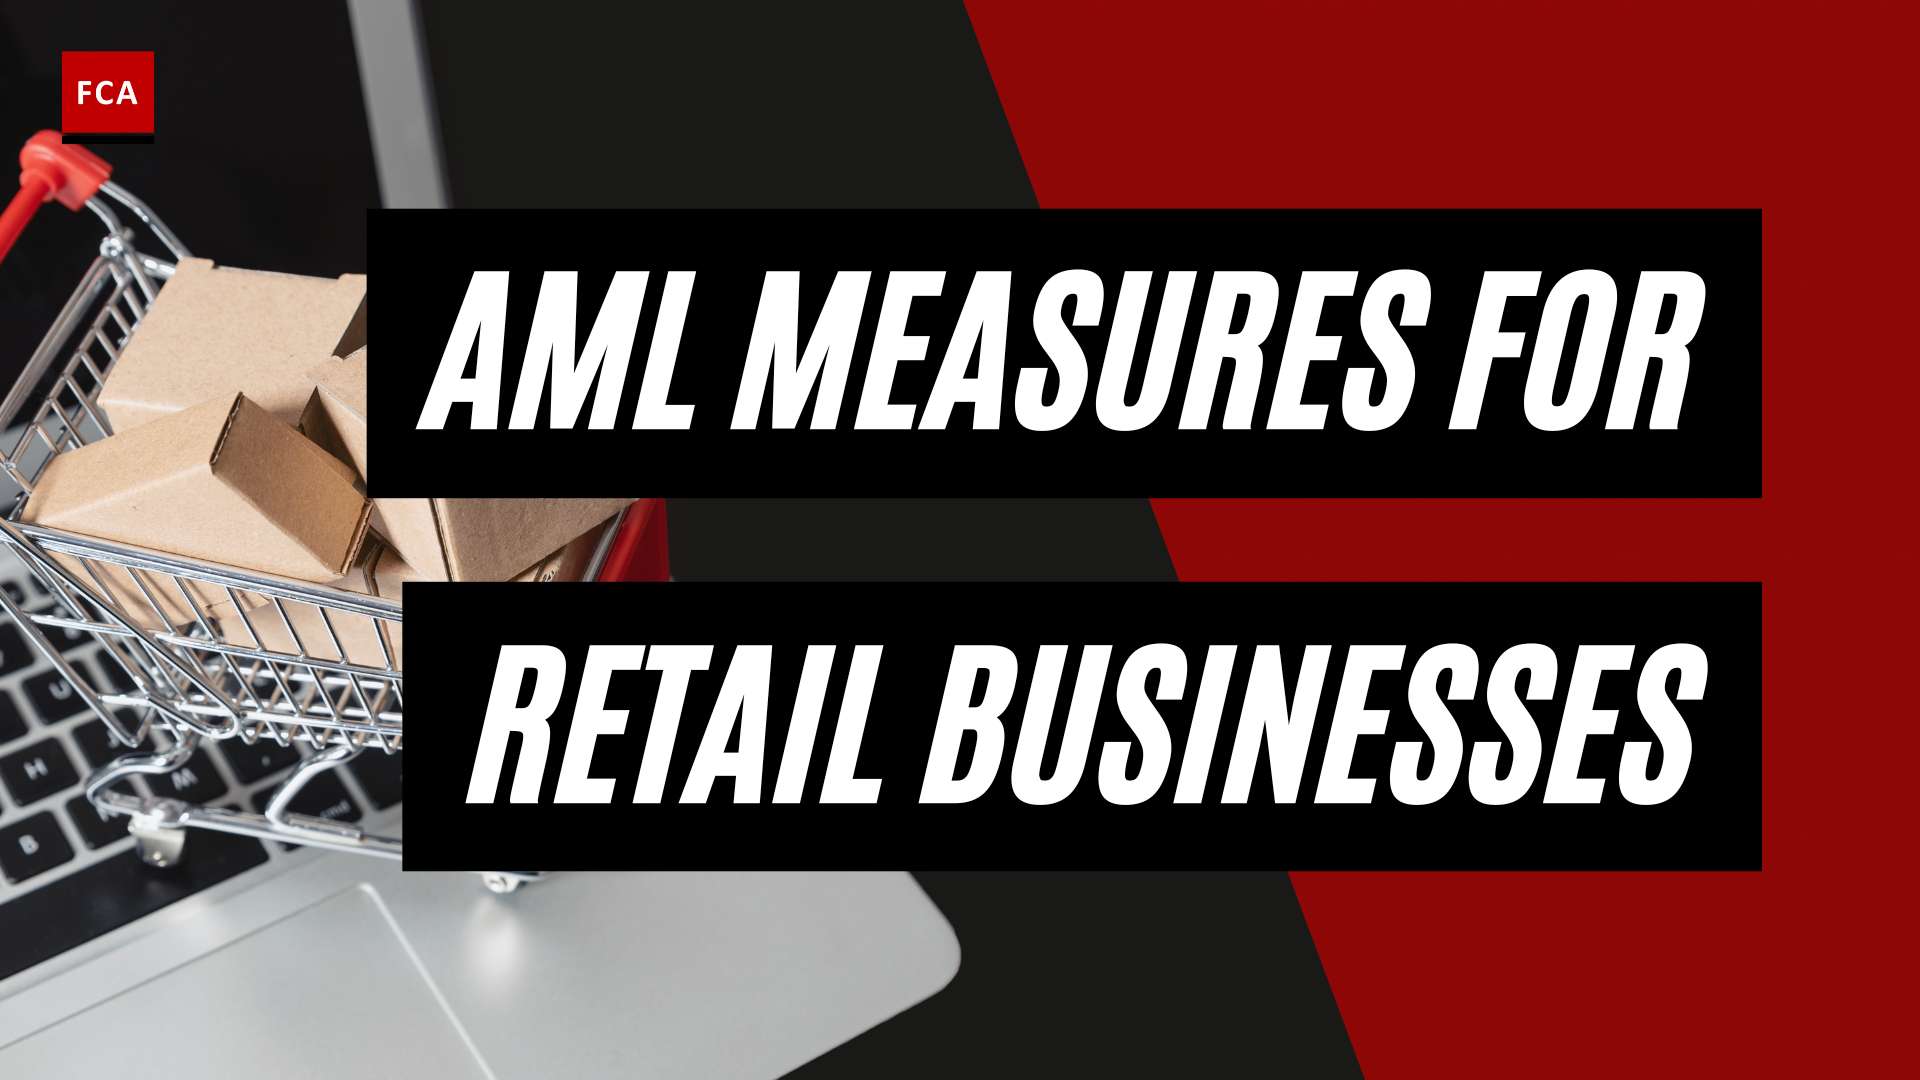 Stay Ahead Of The Game: Proactive Aml Measures For Retail Businesses